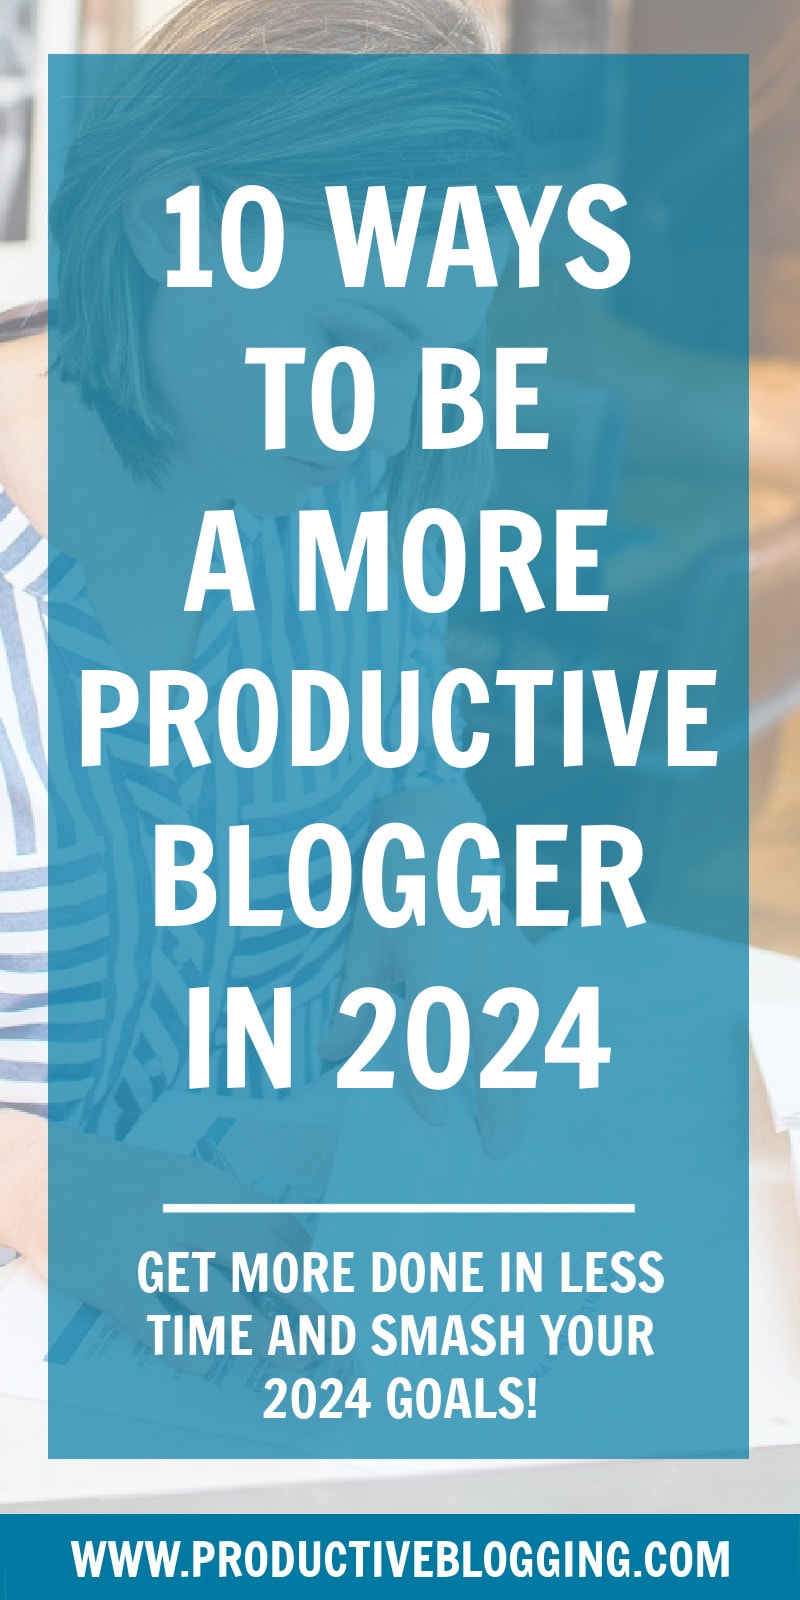 Want to achieve your blogging goals in 2024? Want to get more done in less time on your blog? Here are 10 ways to be a more productive blogger in 2024… #productiveblogger #productivity #productiveblogging #productivitytips #productivityhacks #bloggingtips #blogginghacks #blogginggoals #bloggoals #goalsetting #blogsmarter #blogsmarternotharder #BSNH